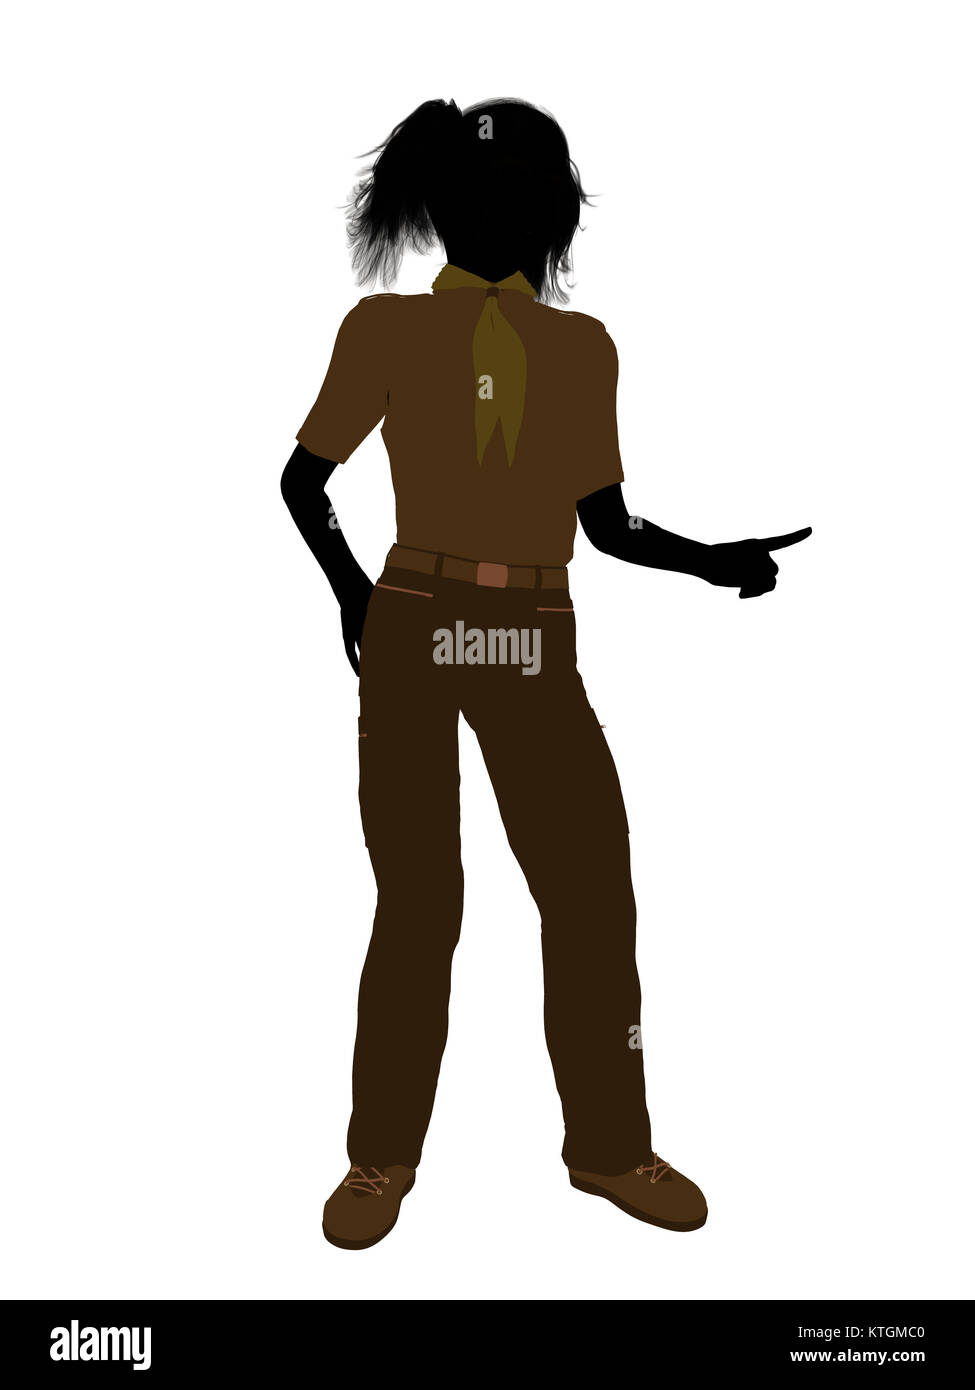 Girl scout silhouette dressed in pants on a white background Stock Photo